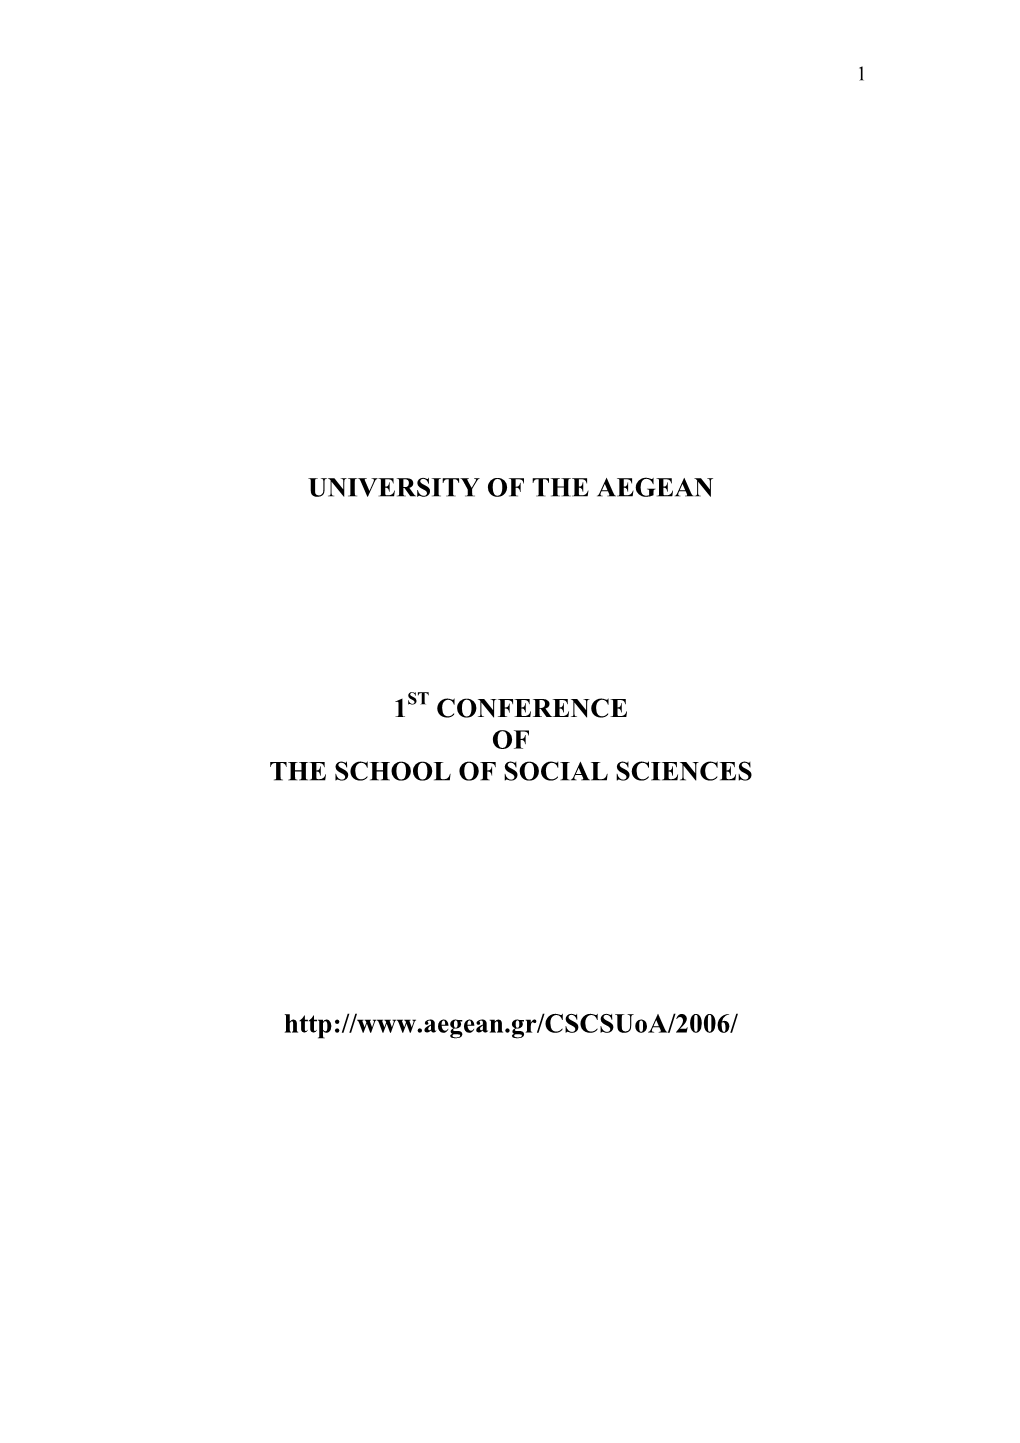 University of the Aegean 1St Conference of the School